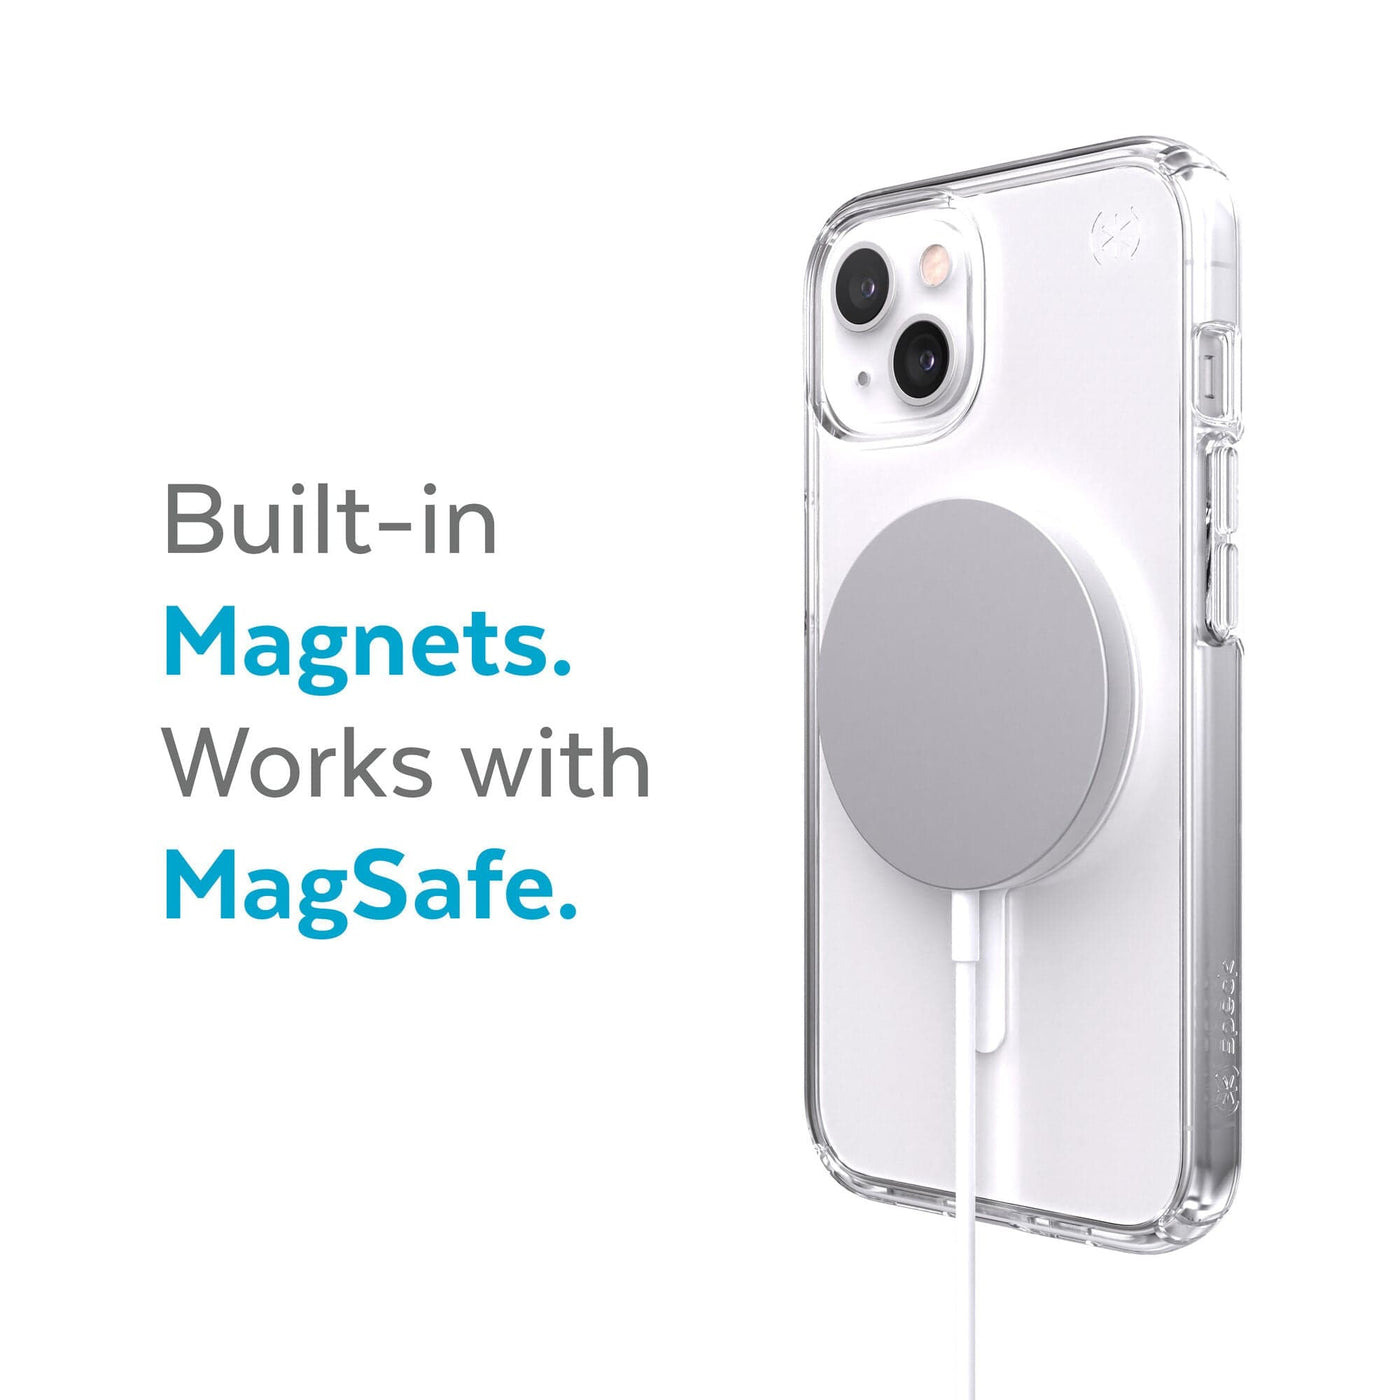 MagSafe compatible iPhone 13 mini case — designed for Apple